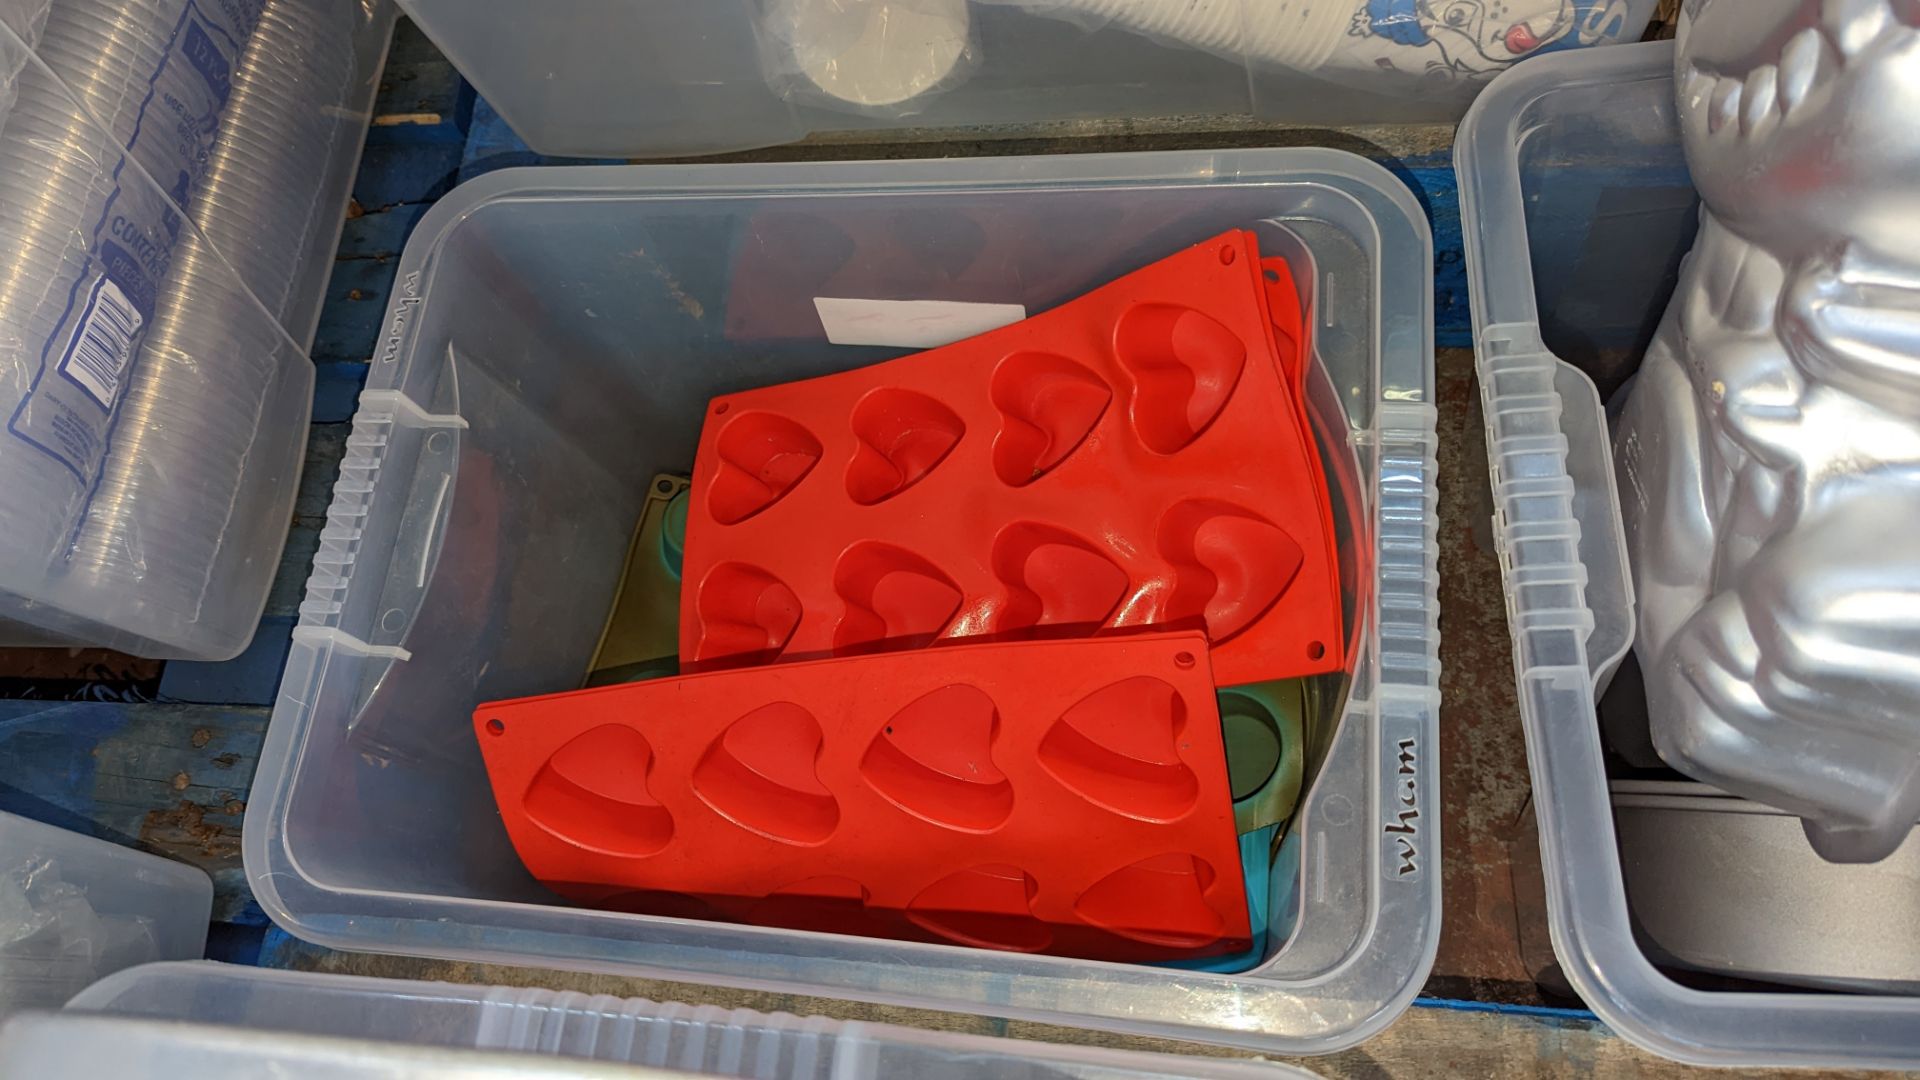 Contents of a crate of large novelty cake moulds in a style of sports shirts, unicorn, heart, dinosa - Image 6 of 6